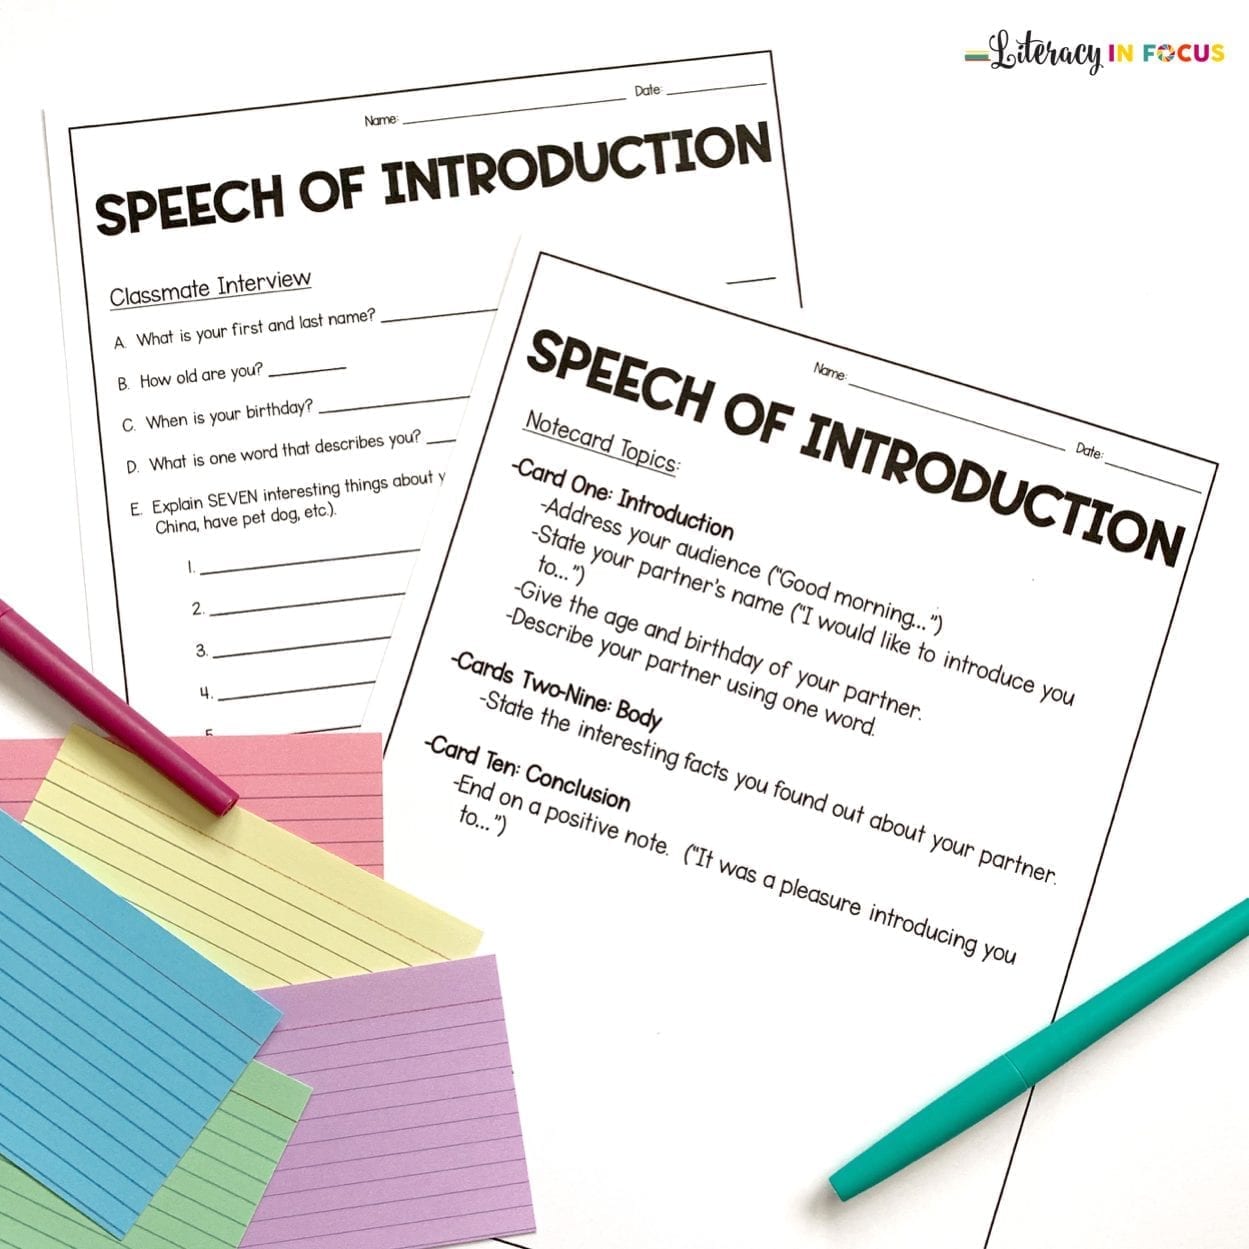 how to make introduction public speech